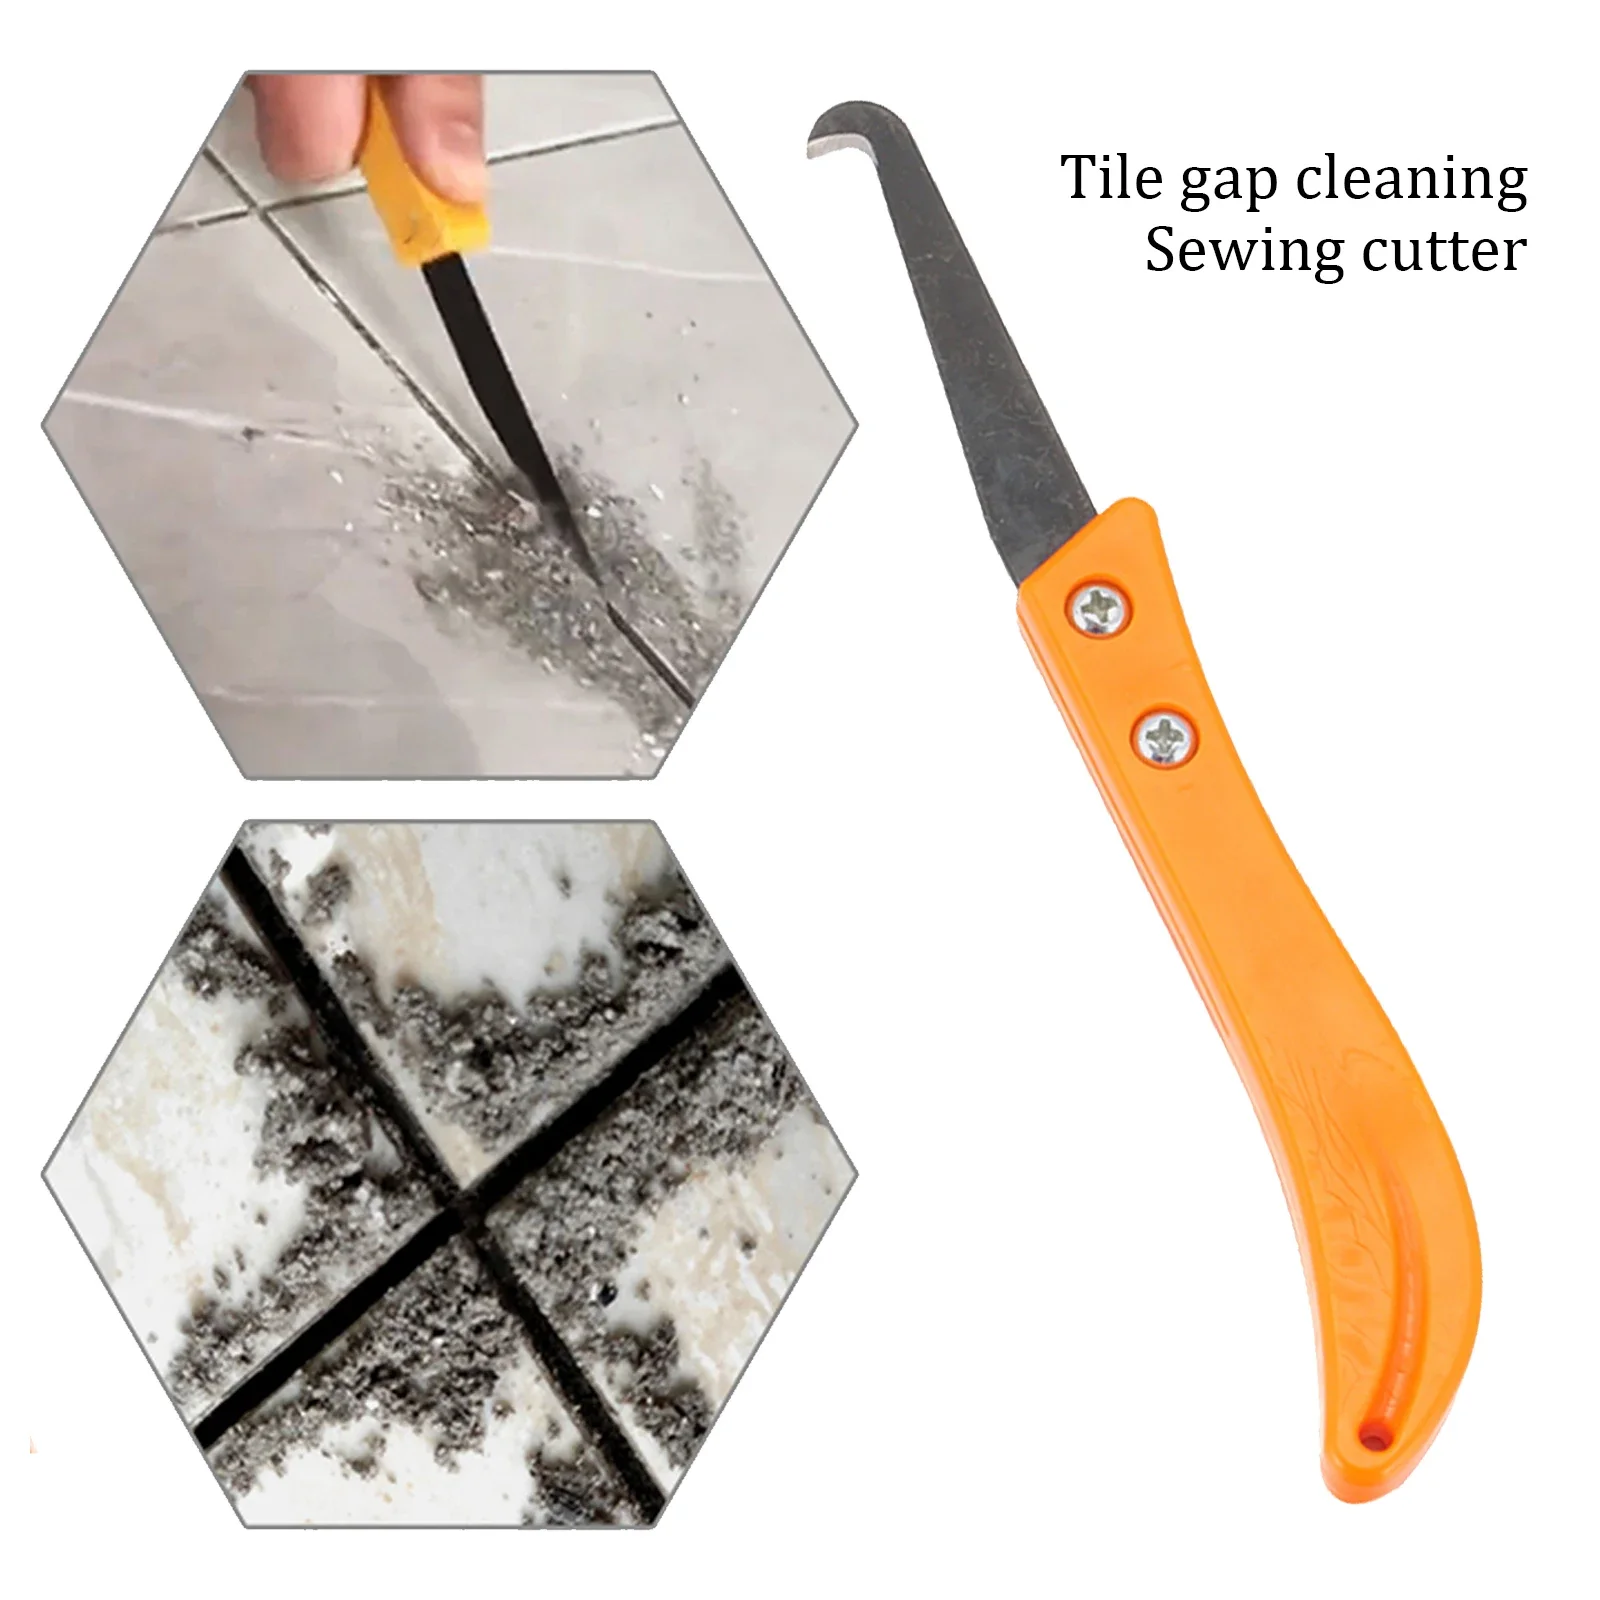 L cleaning and removal of old grout hand tools tile gap repair tool hook knife tungsten thumb200